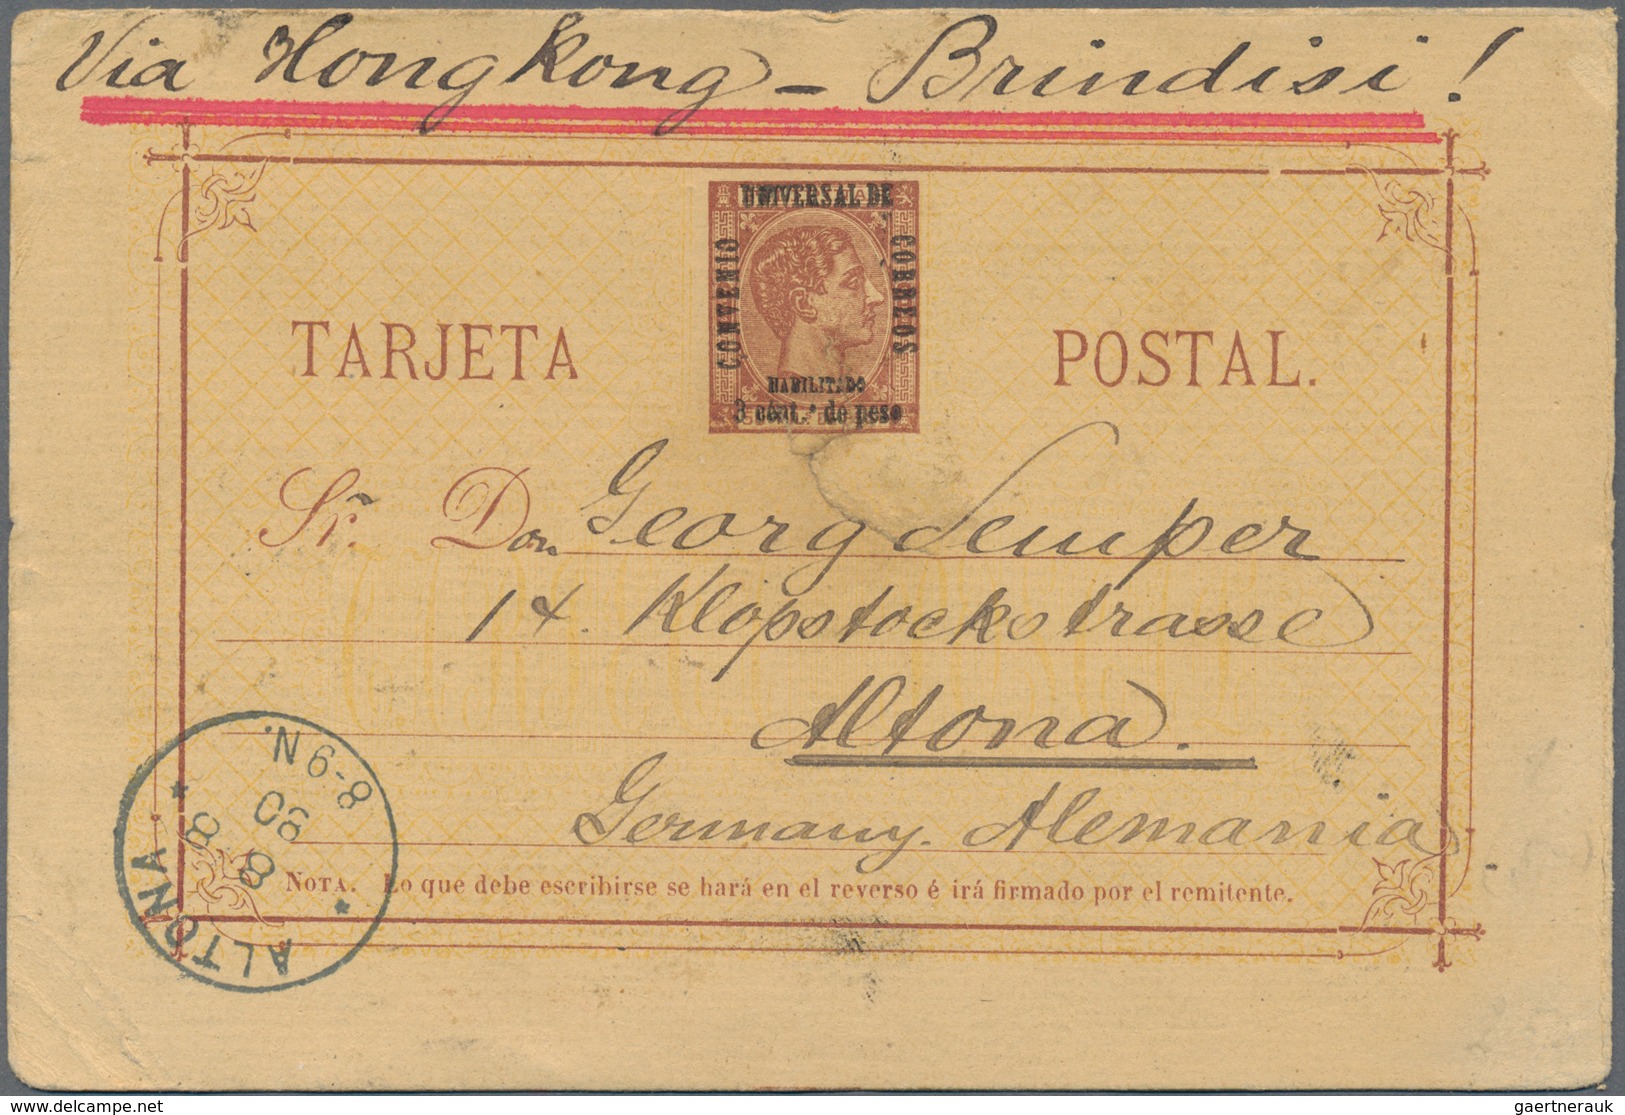 Philippinen: 1850-1946: "The Postal History of the Philippines": Specialized collection of hundreds